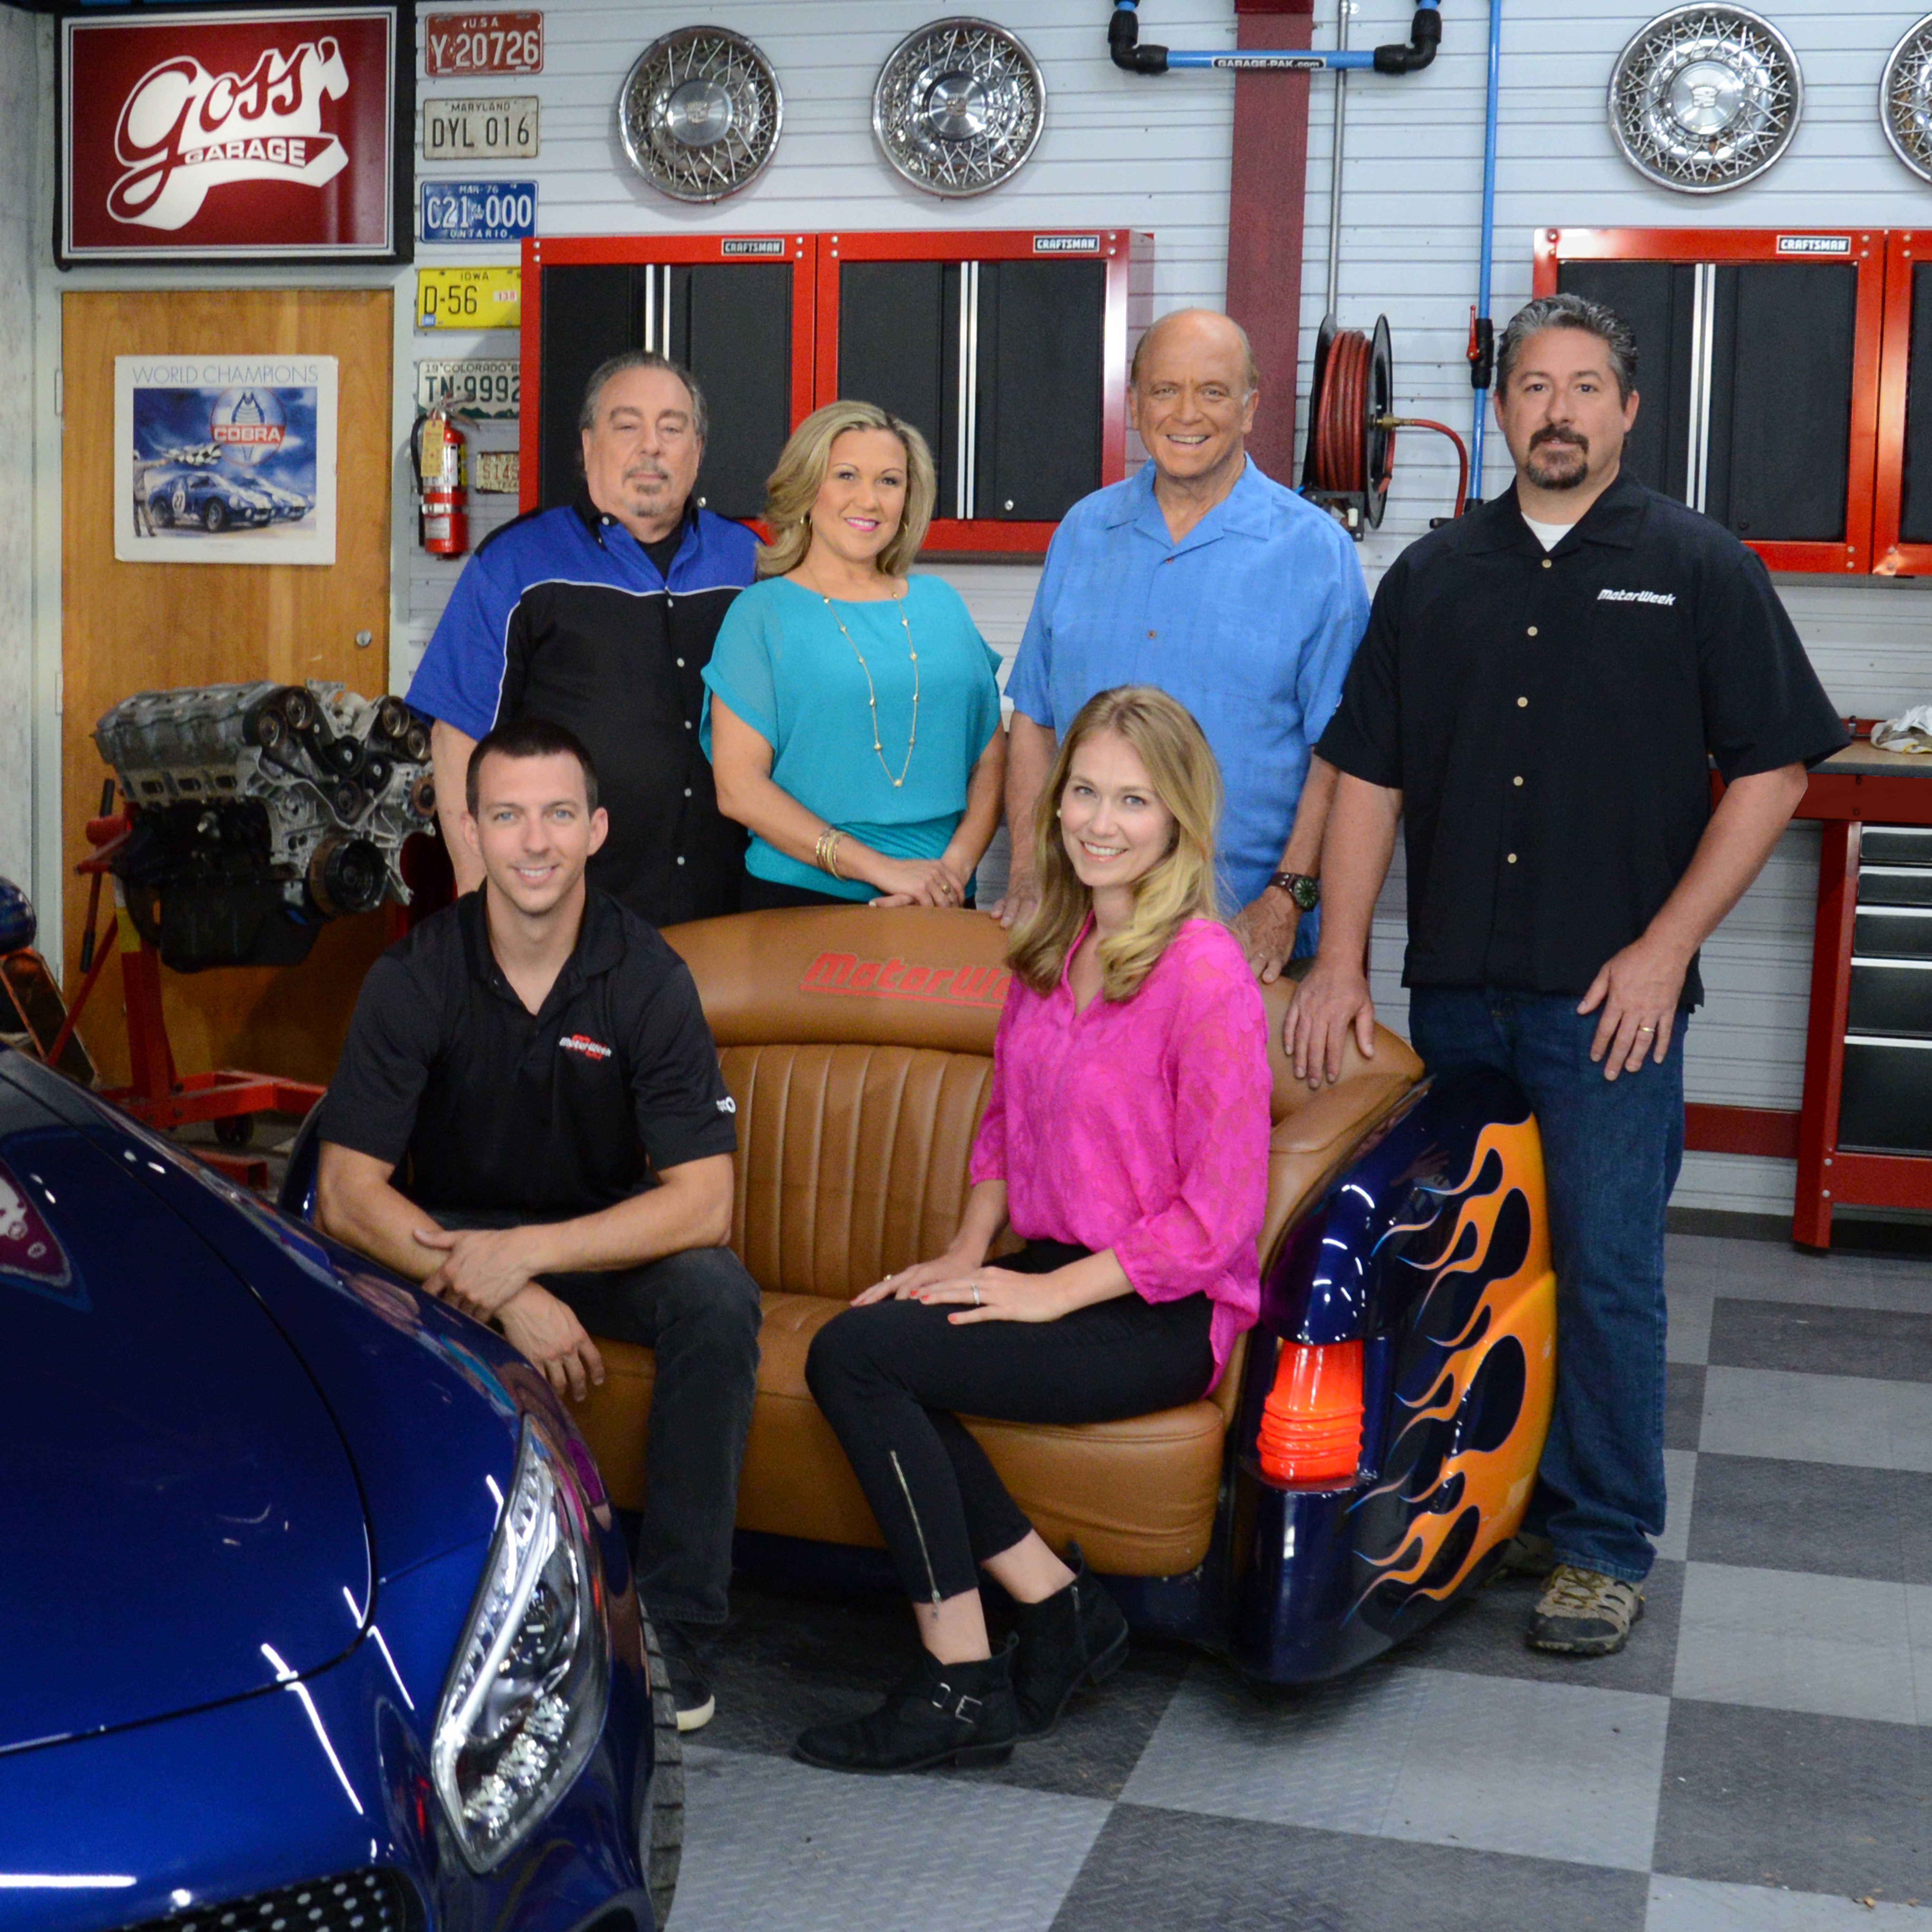 The MotorWeek team takes a break on the series set. Pictured left to right are (sitting) Zach Maskell, Lauren Morrison, (standing) Pat Goss, Yolanda Vazquez, series host John Davis, and Brian Robinson.